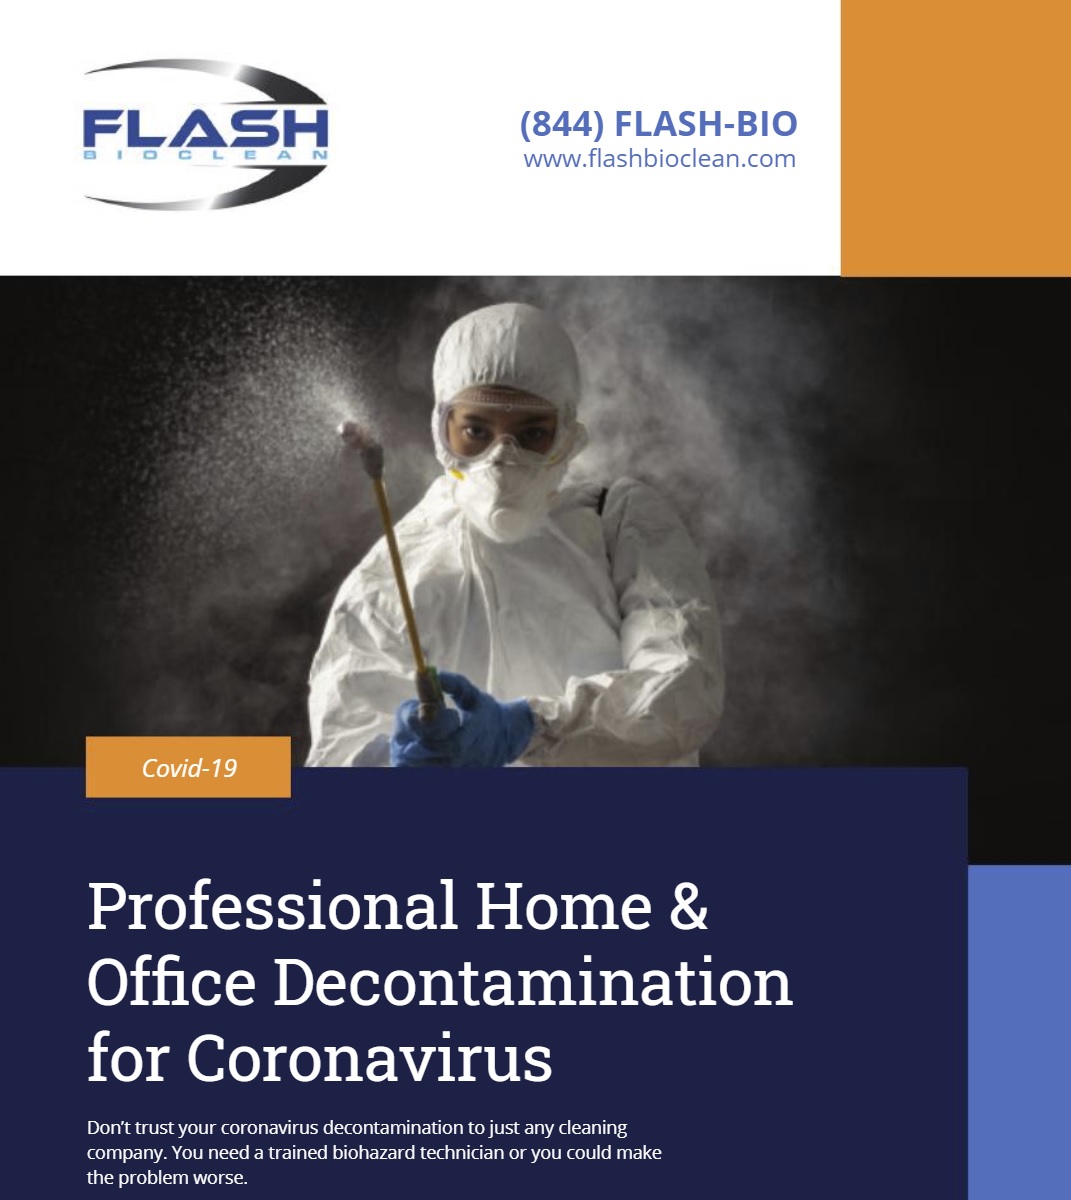 Professional Home & Office Decontamination for Coronavirus by Flash BioClean